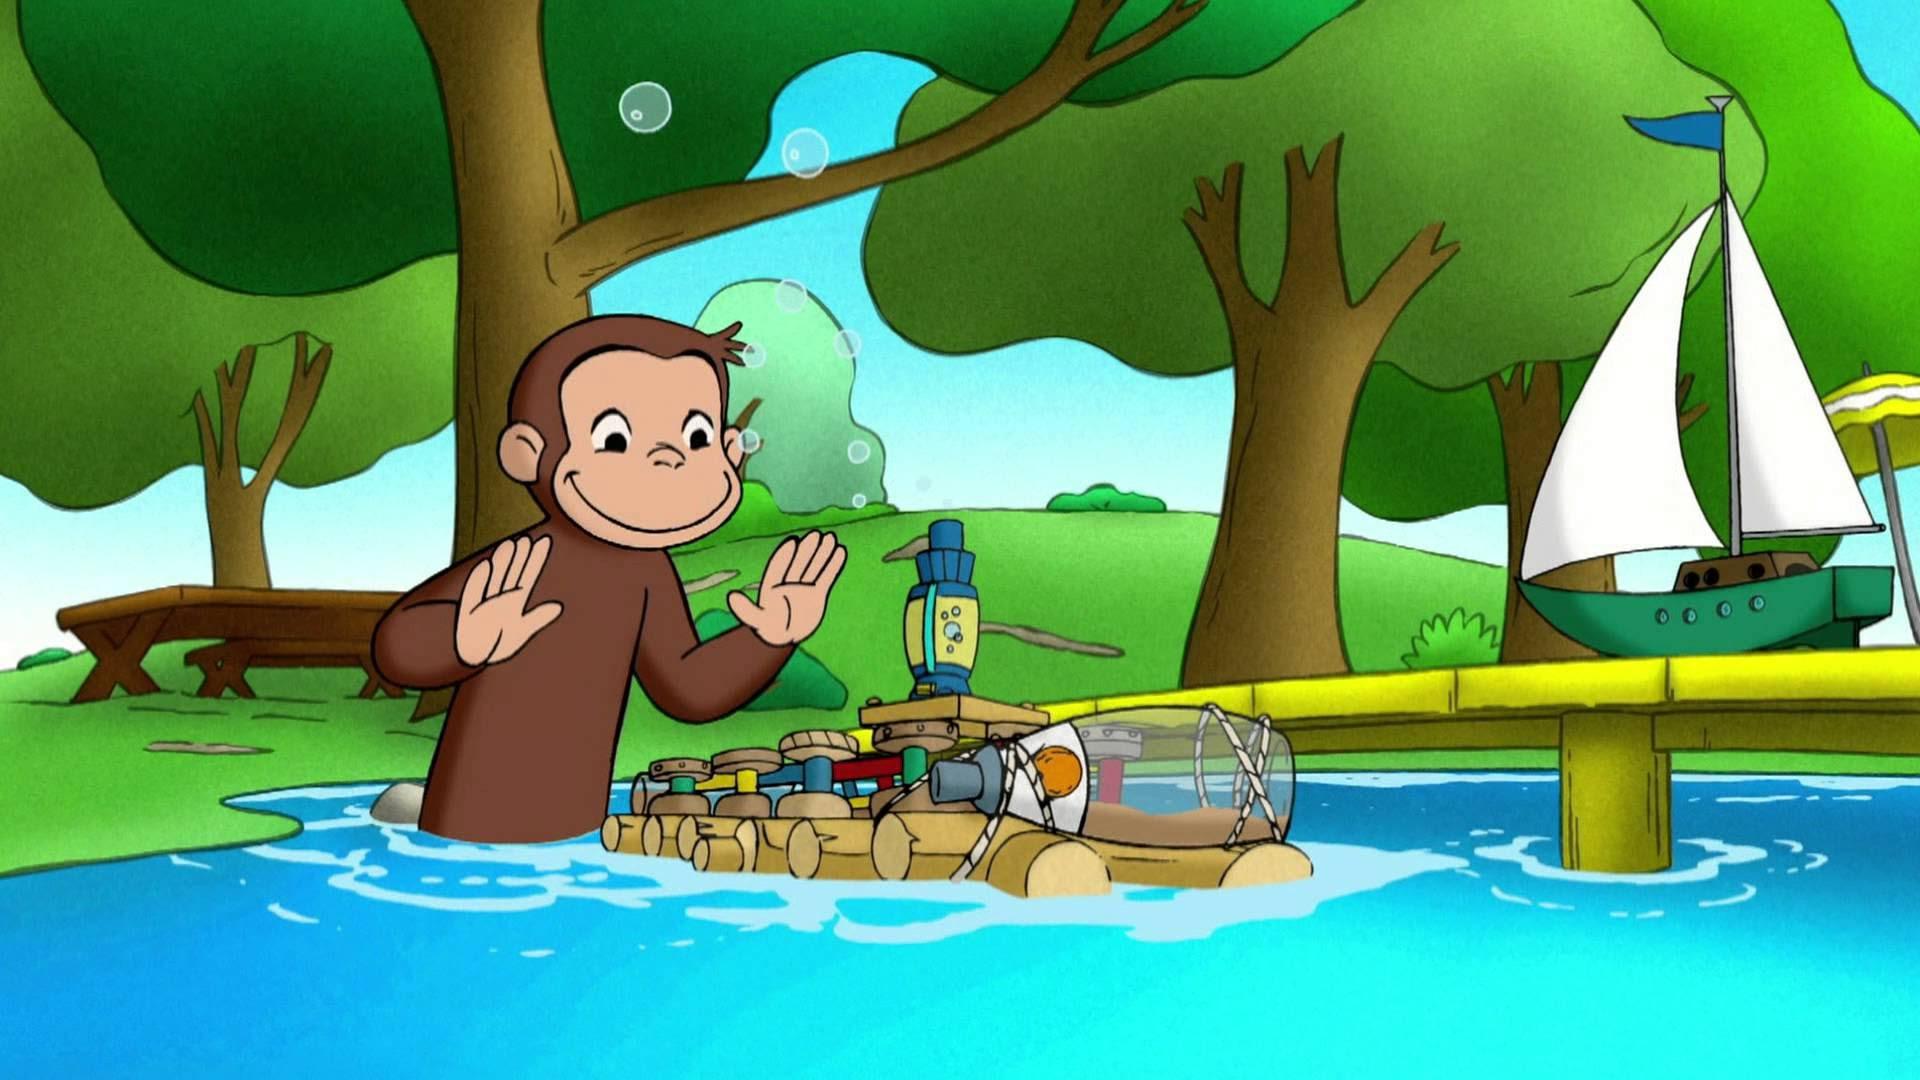 Curious George Wallpaper, image collections of wallpaper